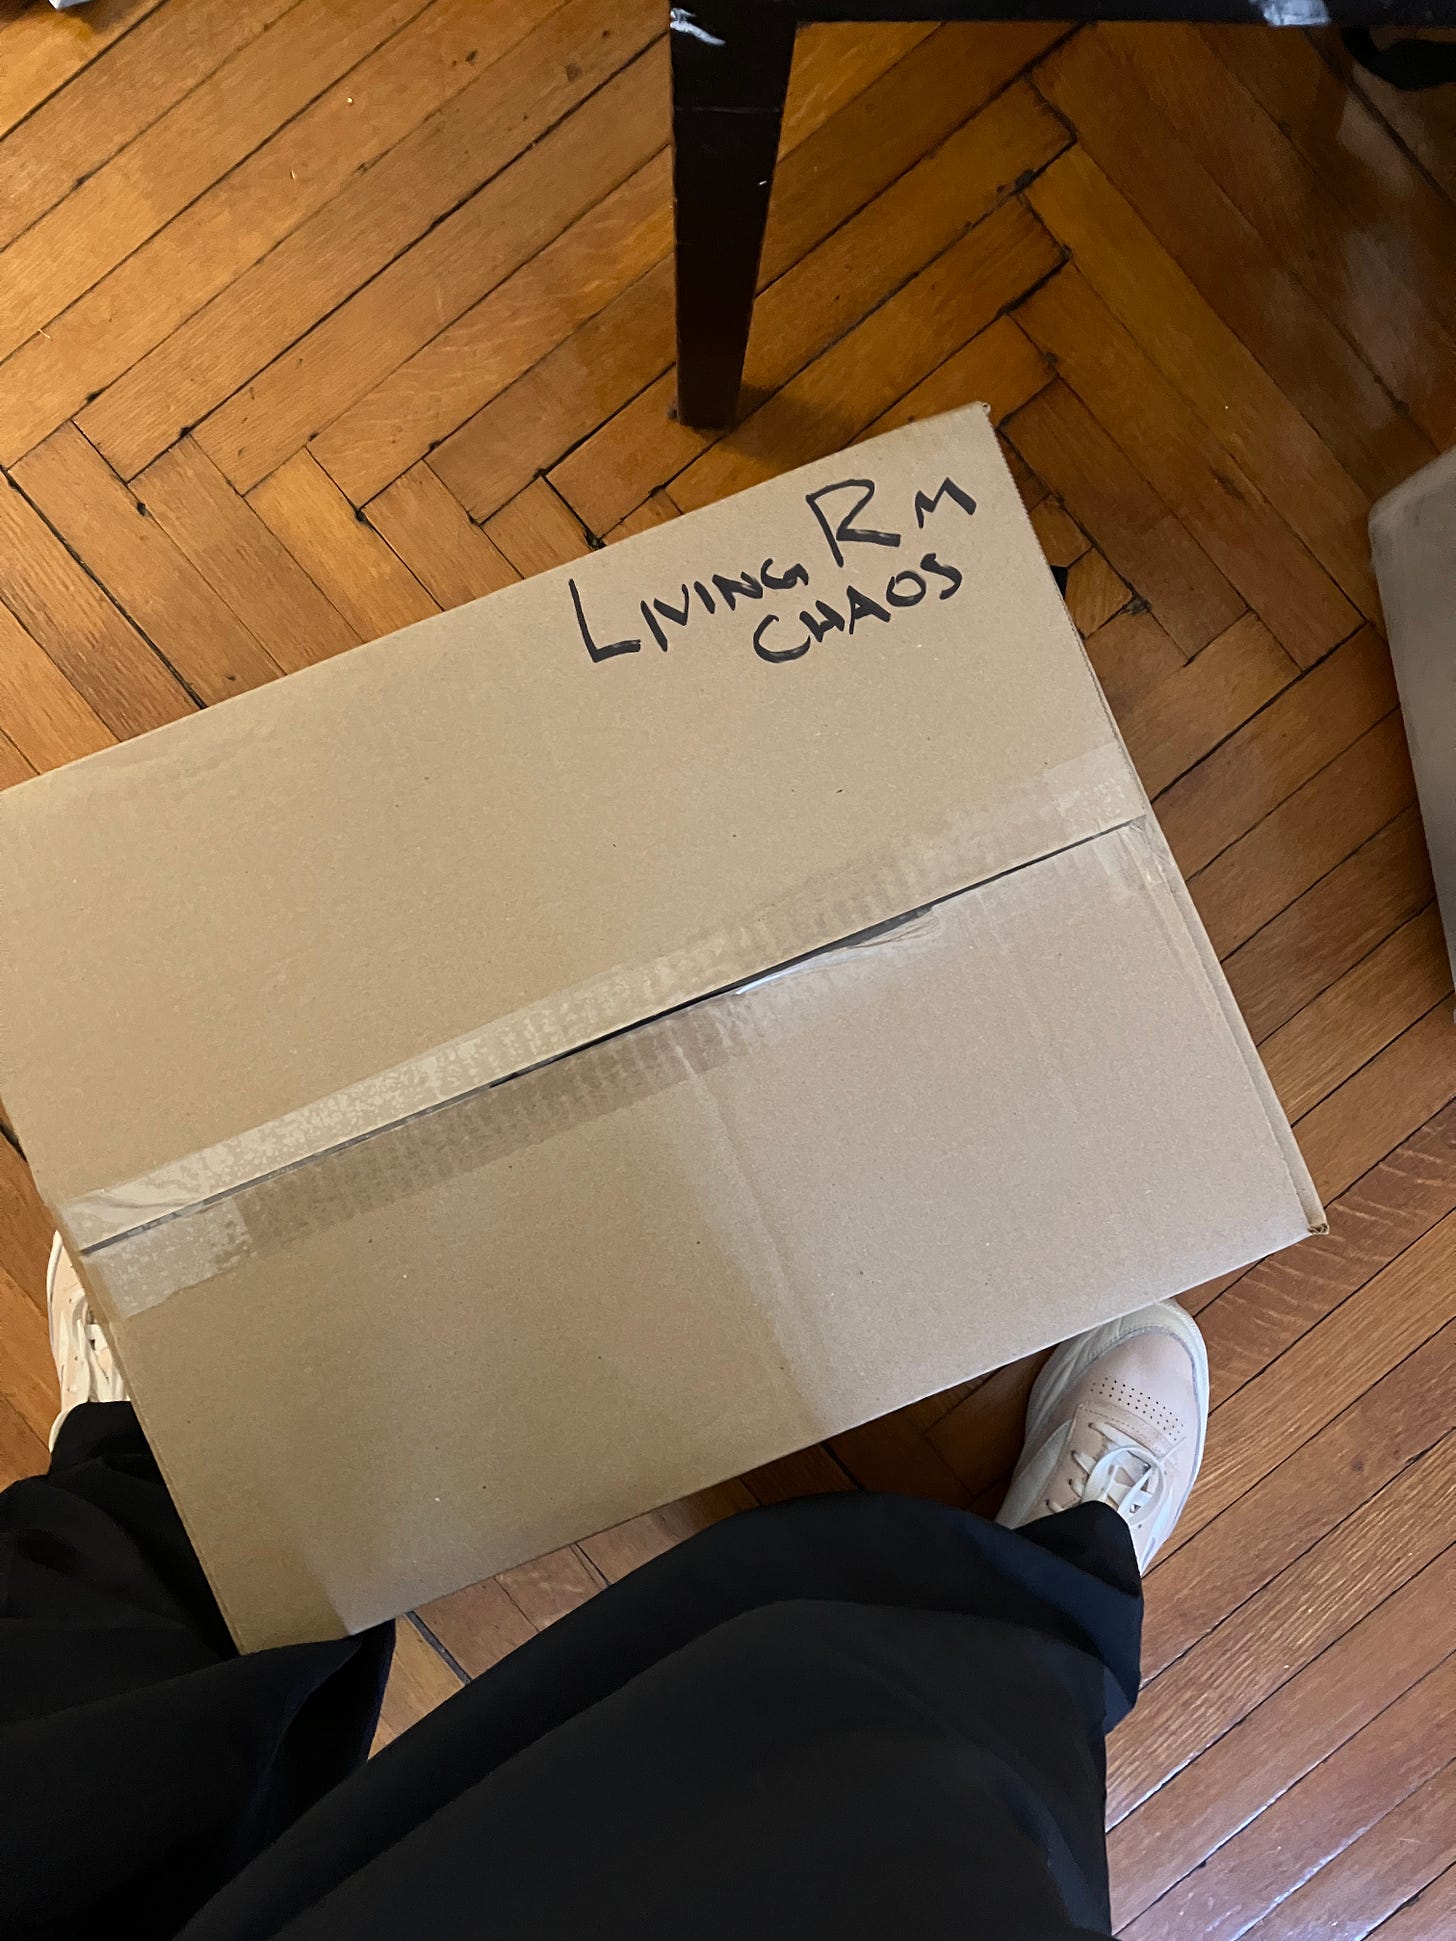 A sealed box on a hardwood floor labeled with Sharpie and all capital letters "LIVING RM CHAOS"